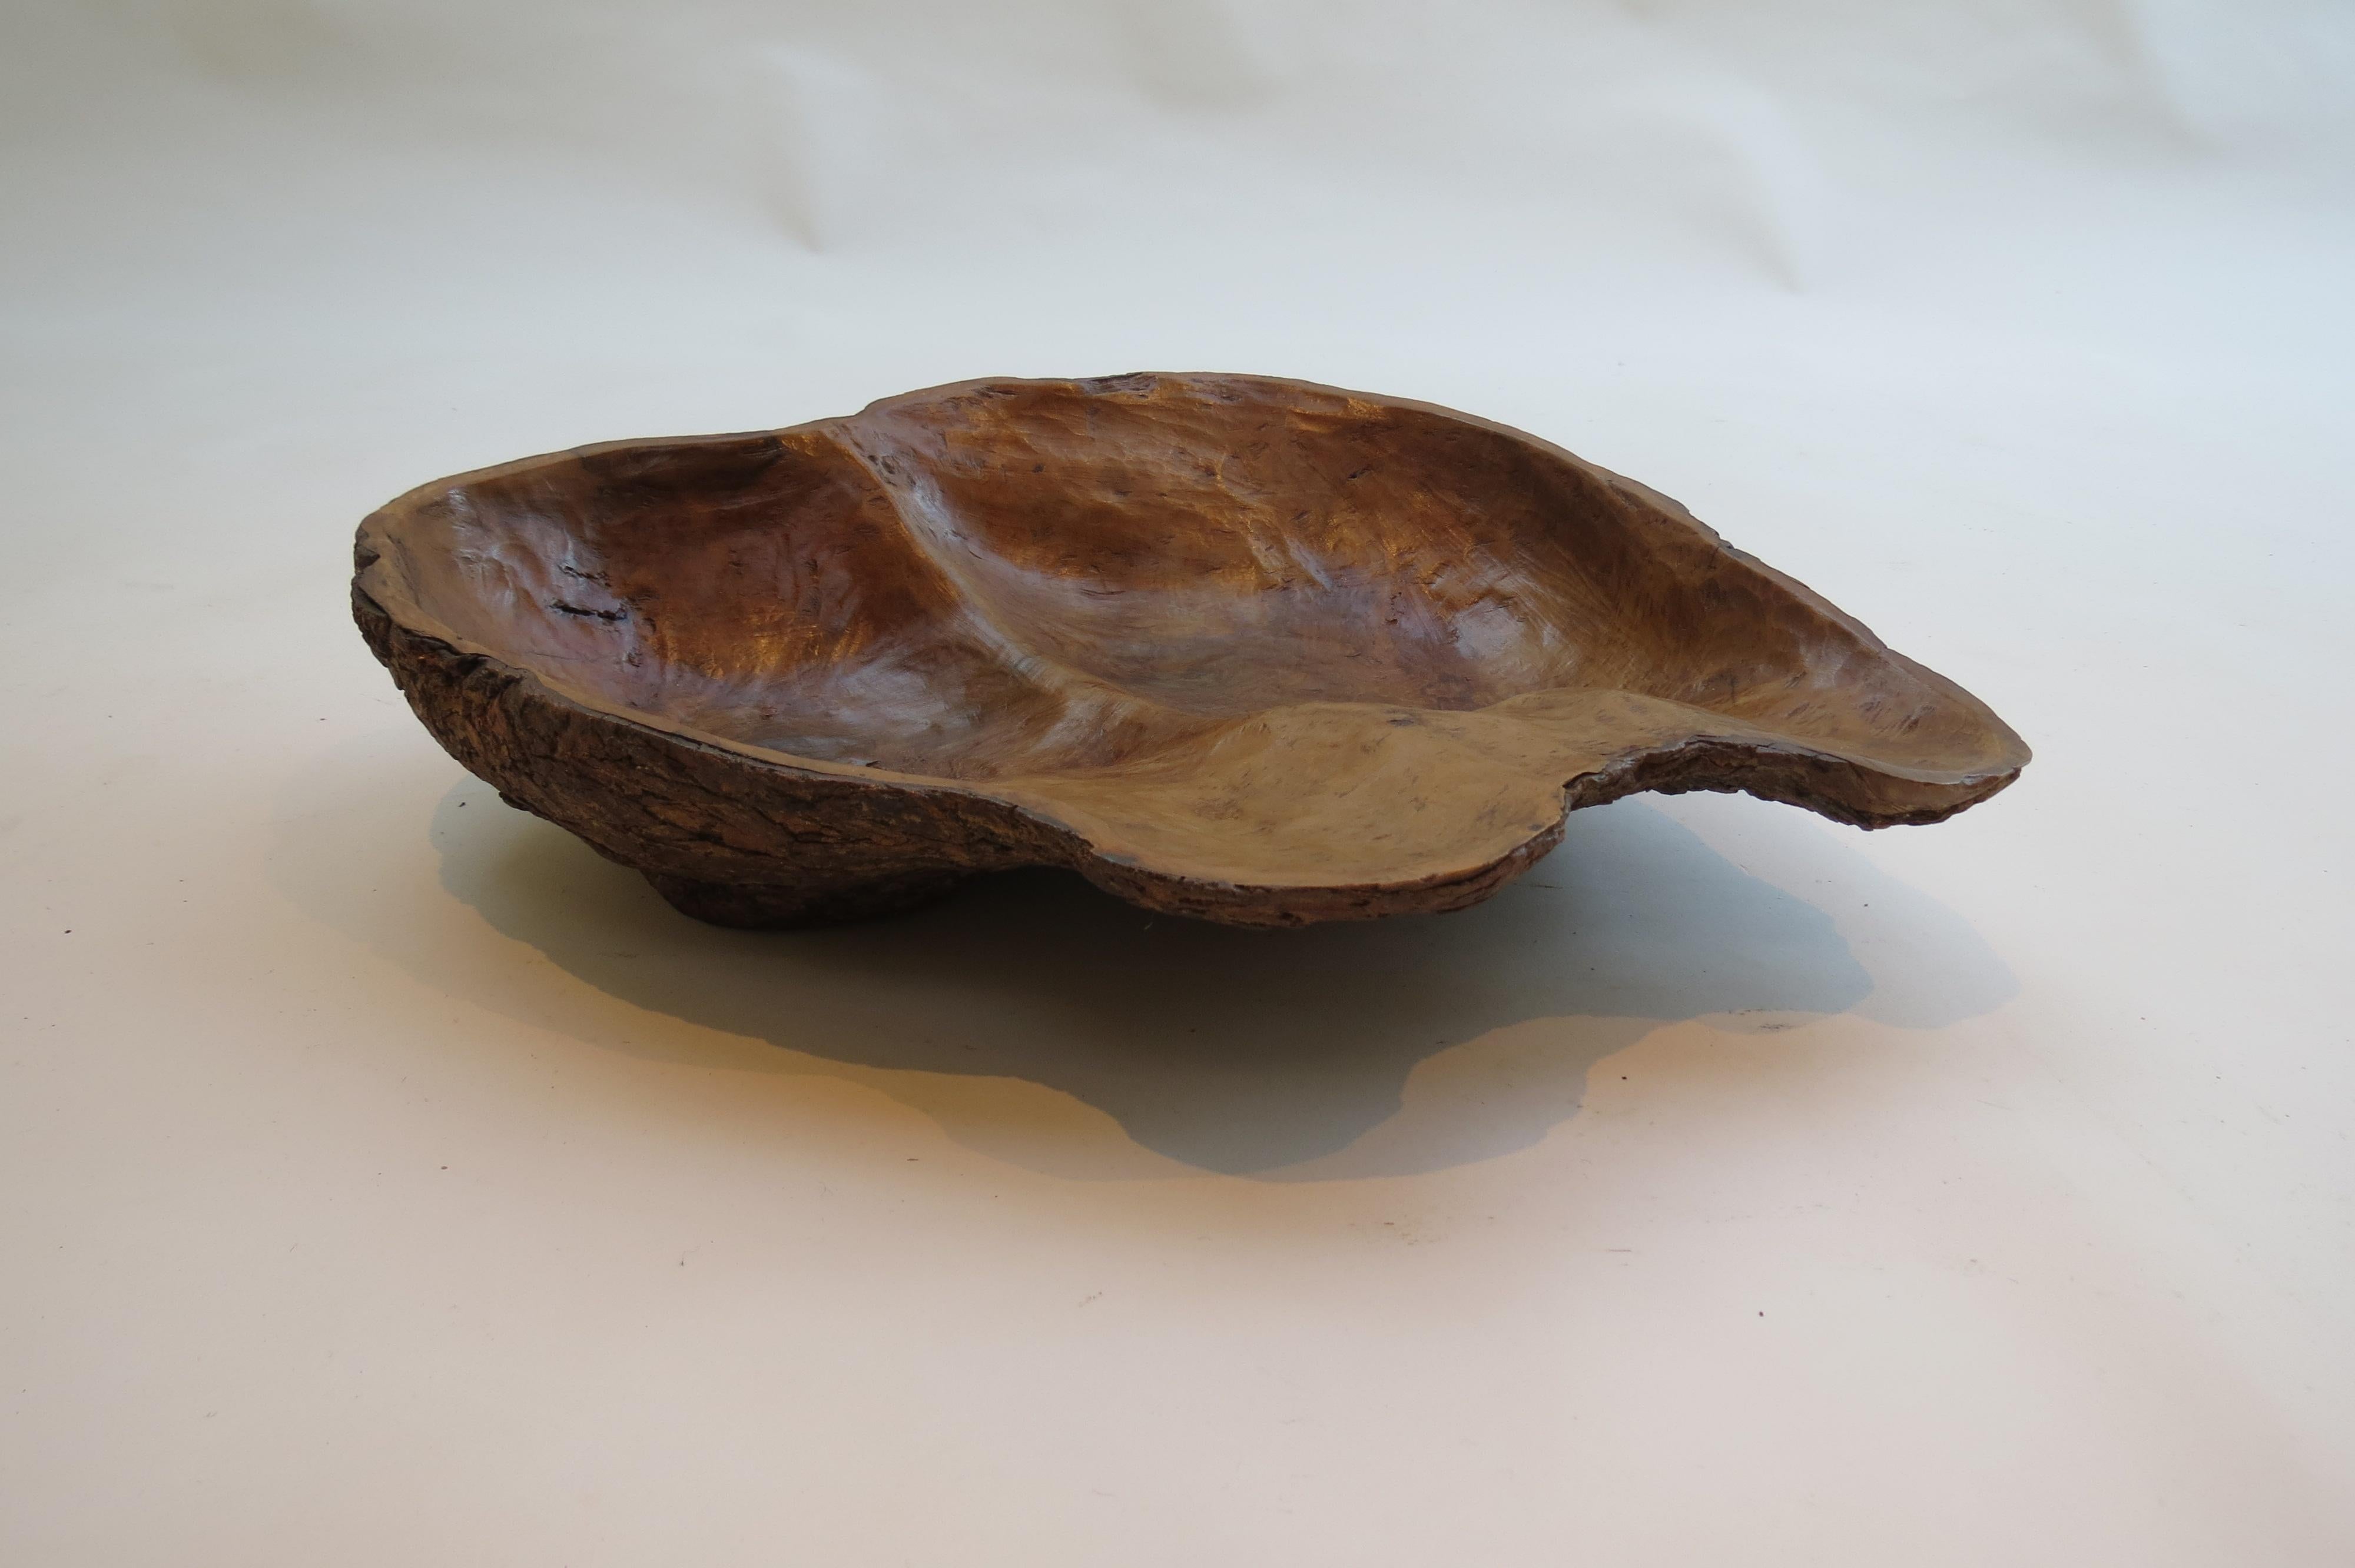 Rustic 1970s Wooden Bowl Made from Olive Wood